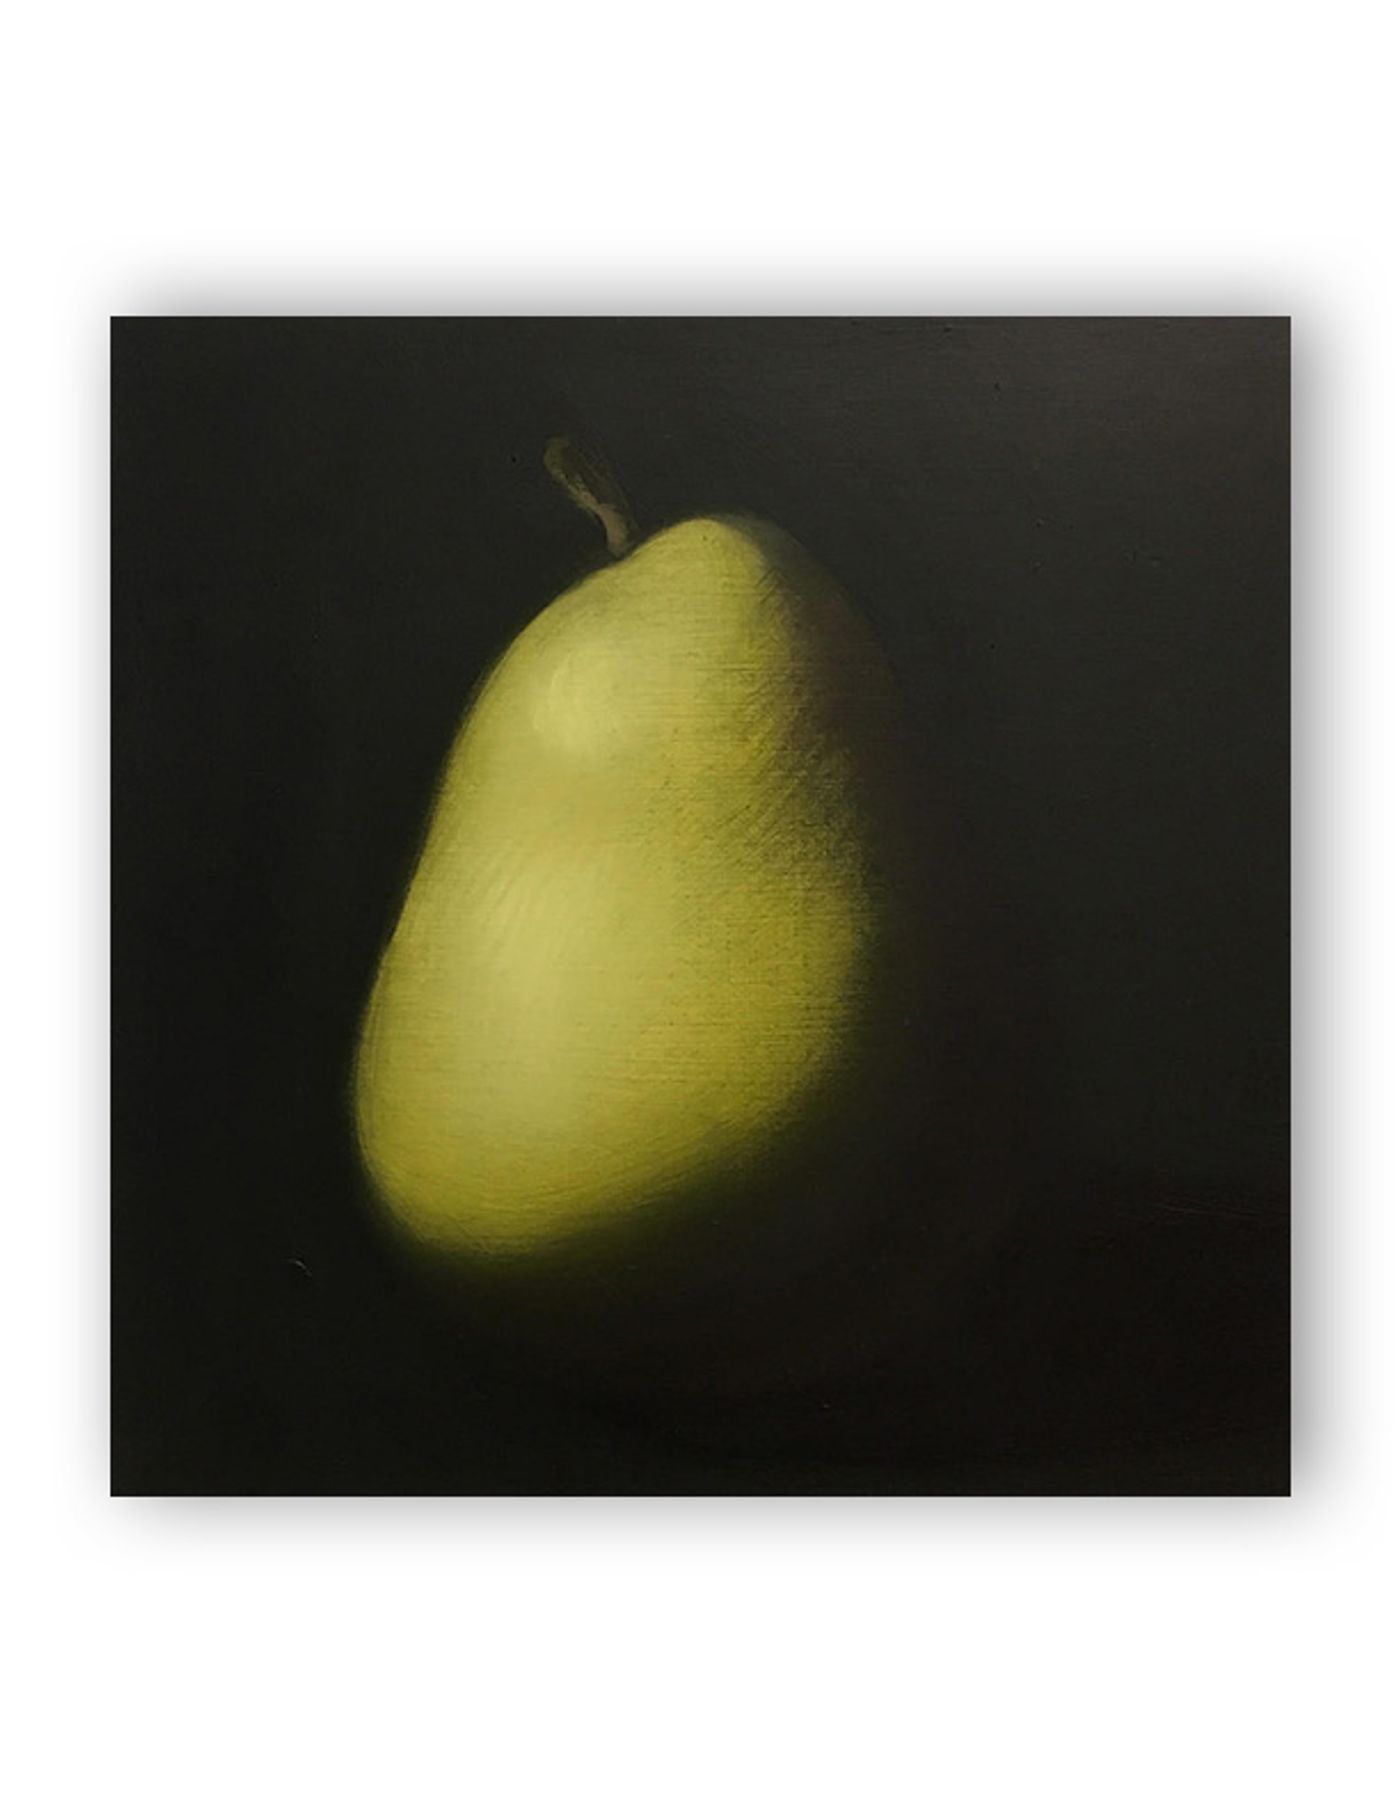 Image of Pear, 2019: Oil on panel 